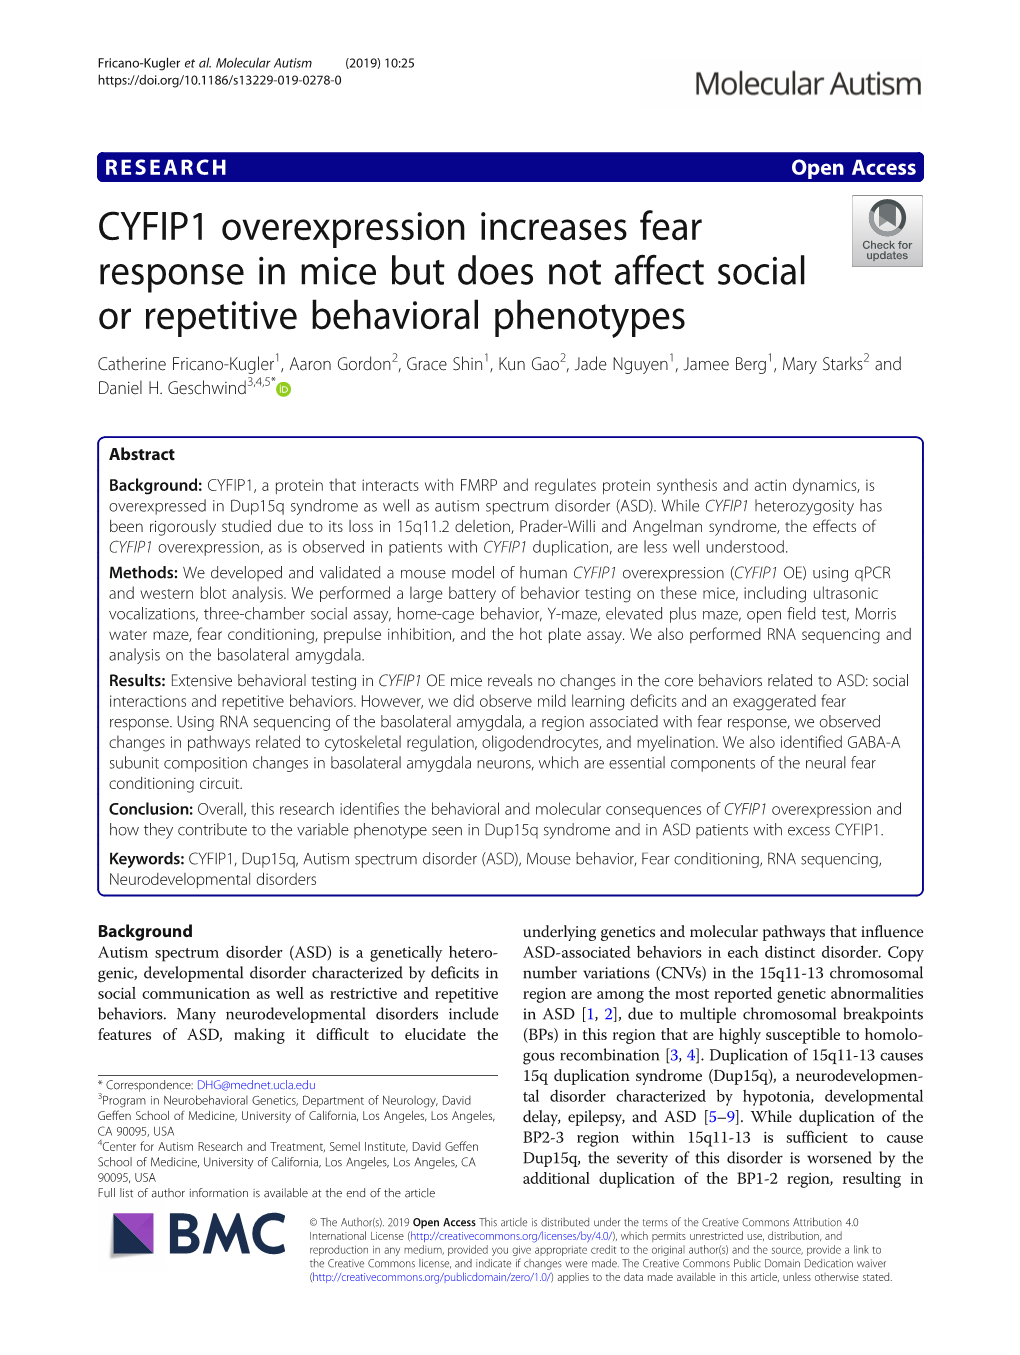 CYFIP1 Overexpression Increases Fear Response in Mice